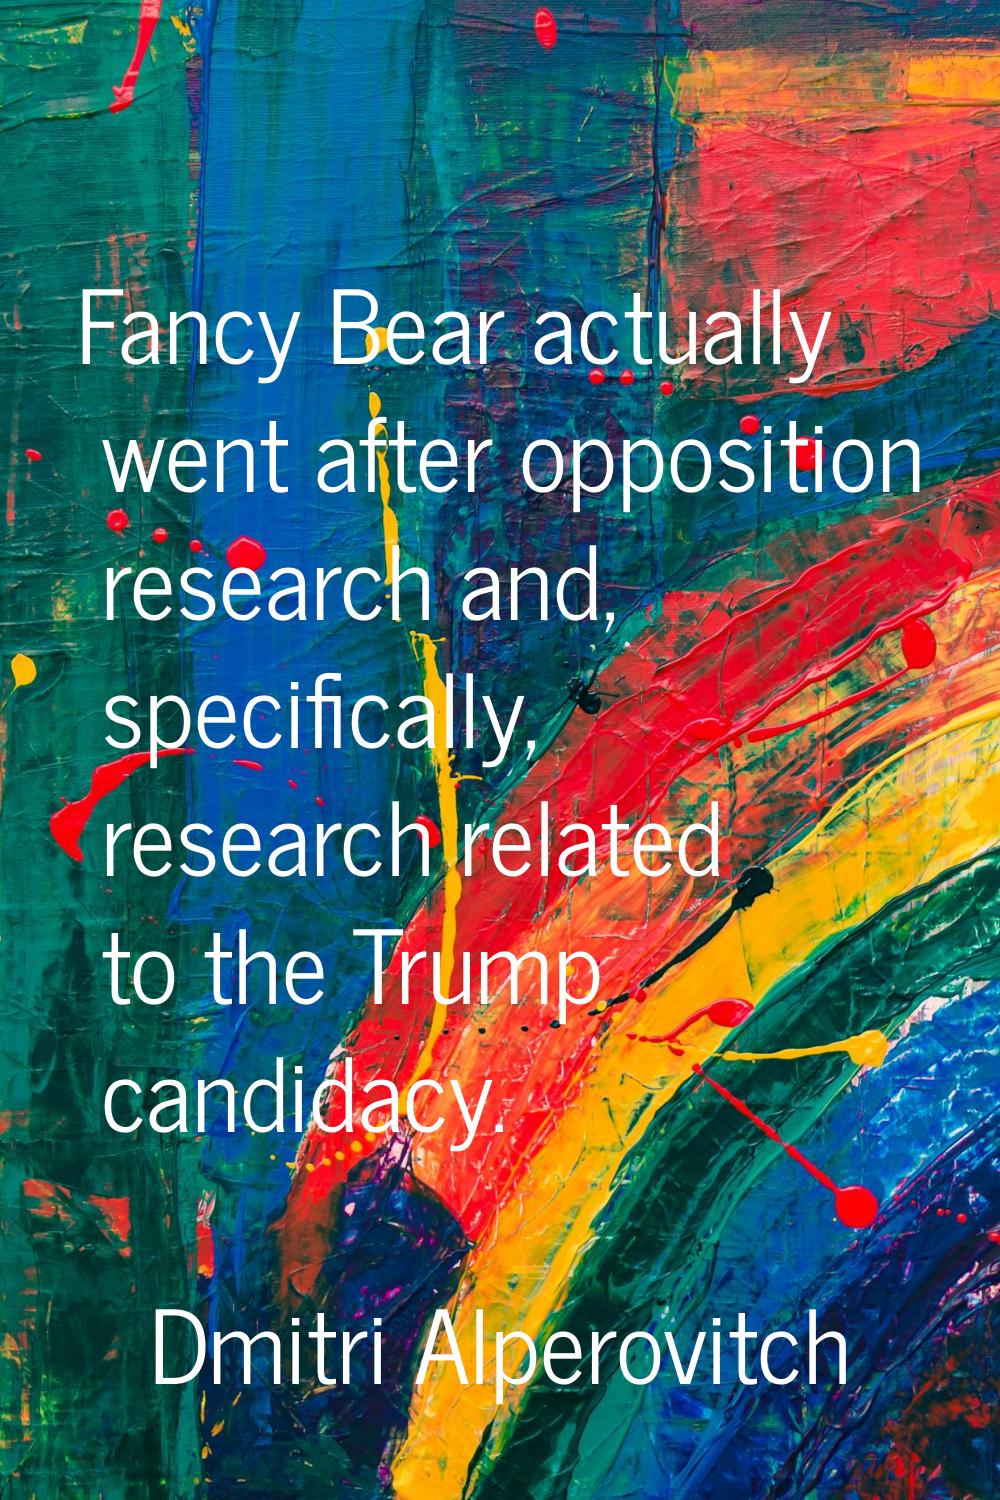 Fancy Bear actually went after opposition research and, specifically, research related to the Trump